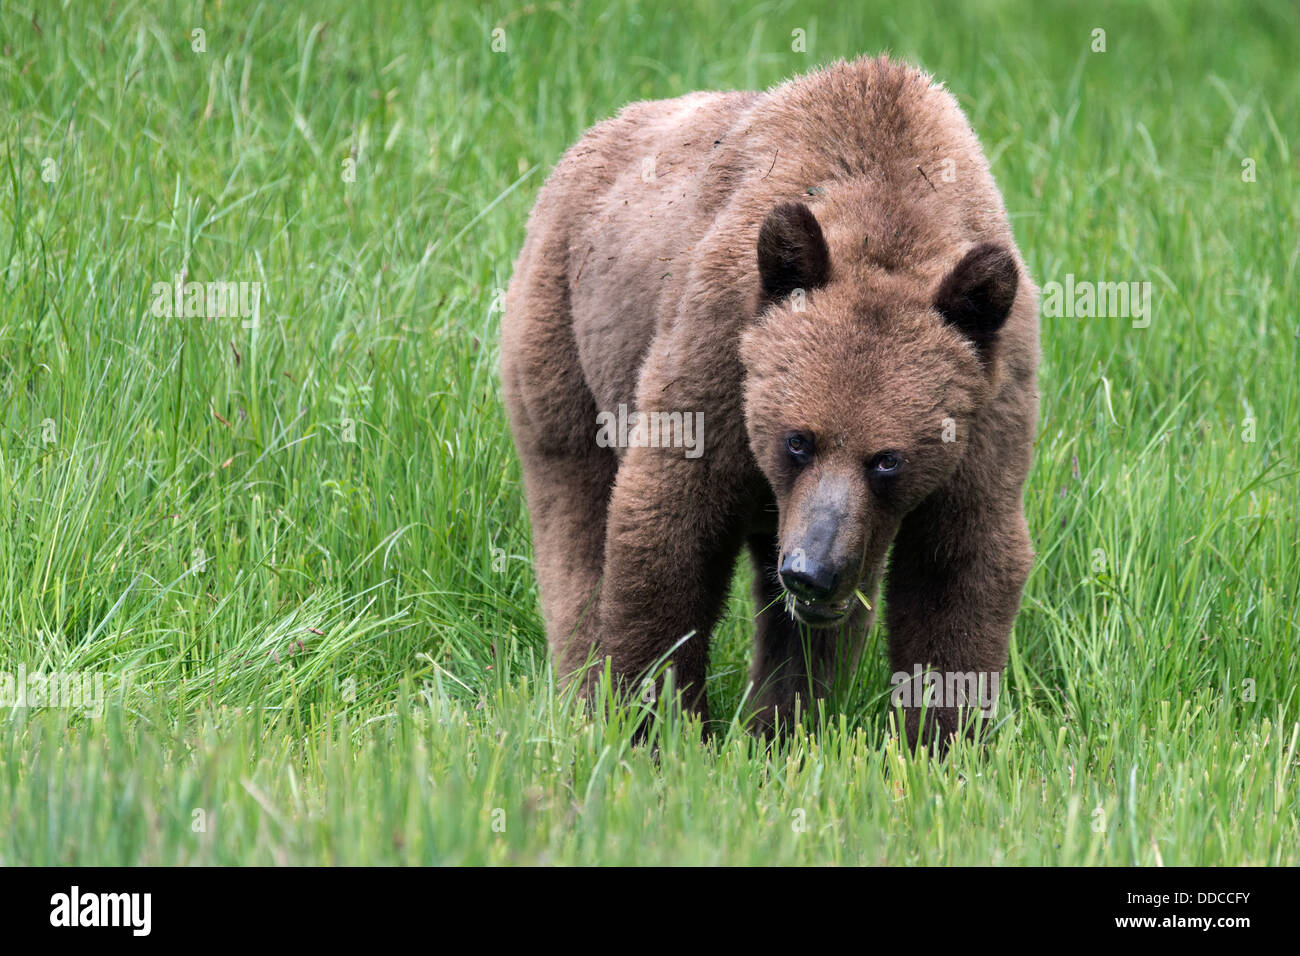 Young grizzly bear eating sedge grass, Khutze Inlet, British Columbia Stock Photo